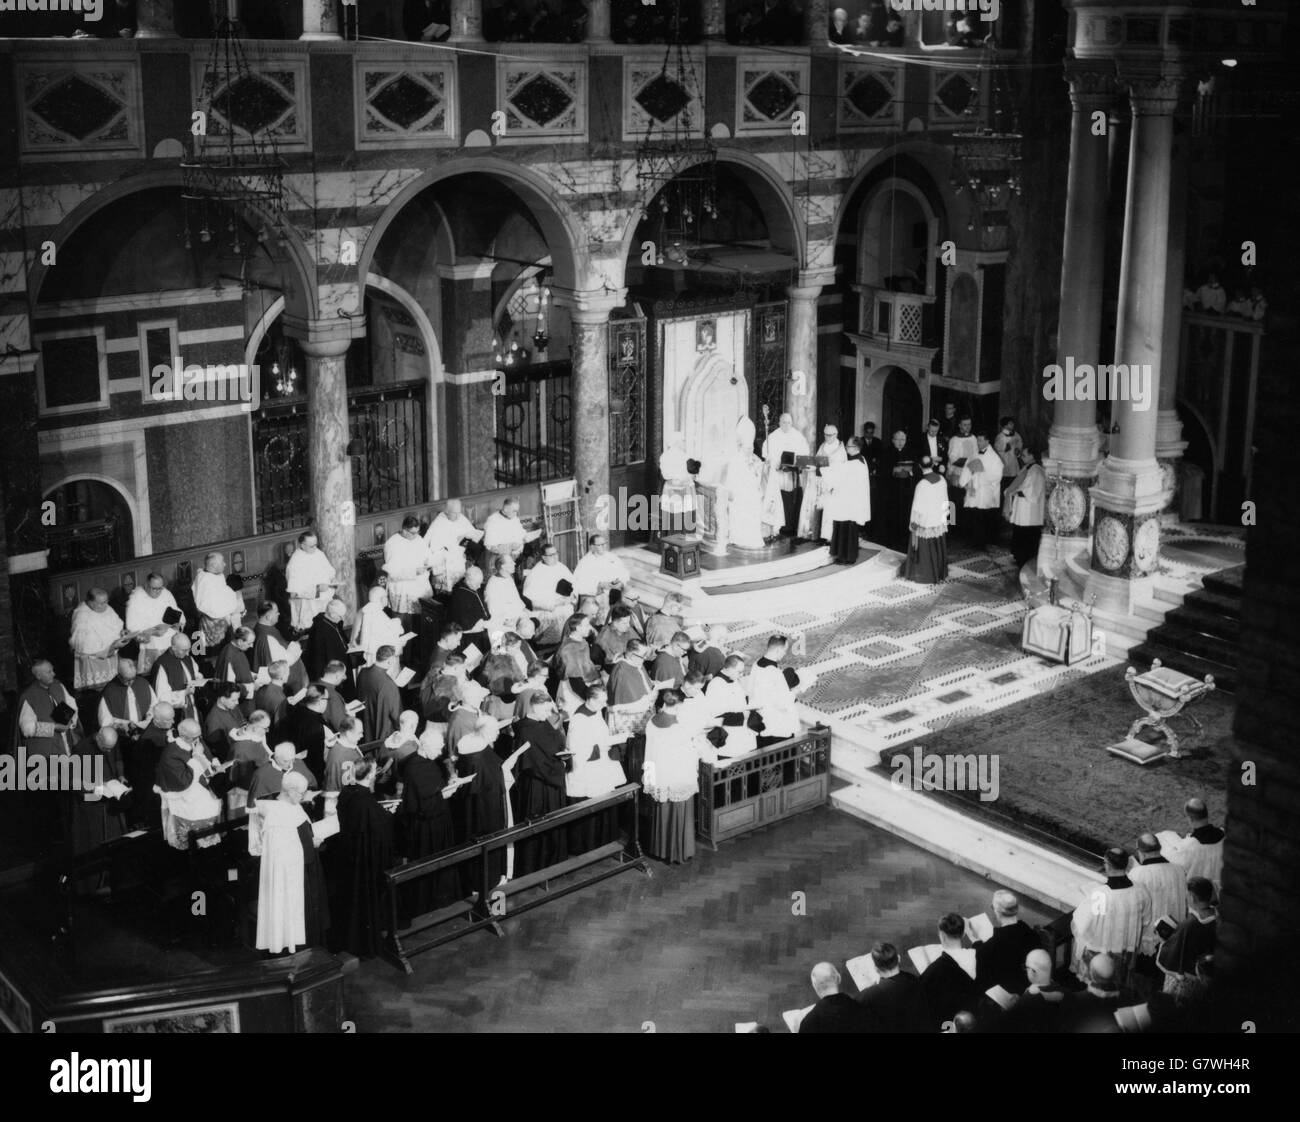 Dr William Godfrey was solemnly enthroned as seventh Roman Catholic Archbishop of Westminster in Westminster Cathedral, London, the Feast of the Apparition of Our Lady at Lourdes. Dr. Godfrey was born in Liverpool in 1889, was formerly Archbishop of Liverpool. He succeeds the late Cardinal Bernard Griffin. Stock Photo